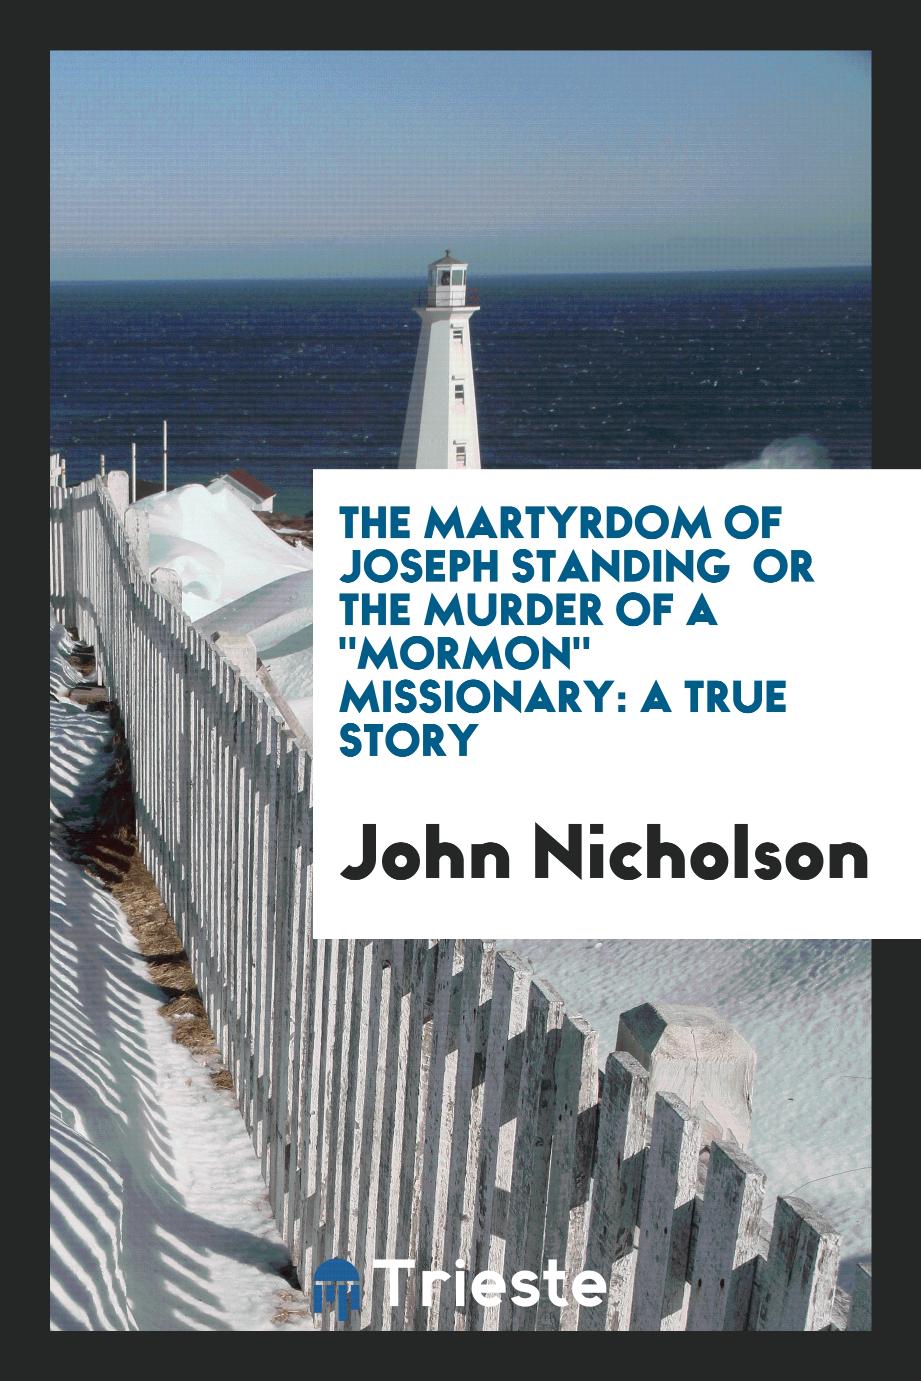 The martyrdom of Joseph Standing or The murder of a "Mormon" missionary: a true story